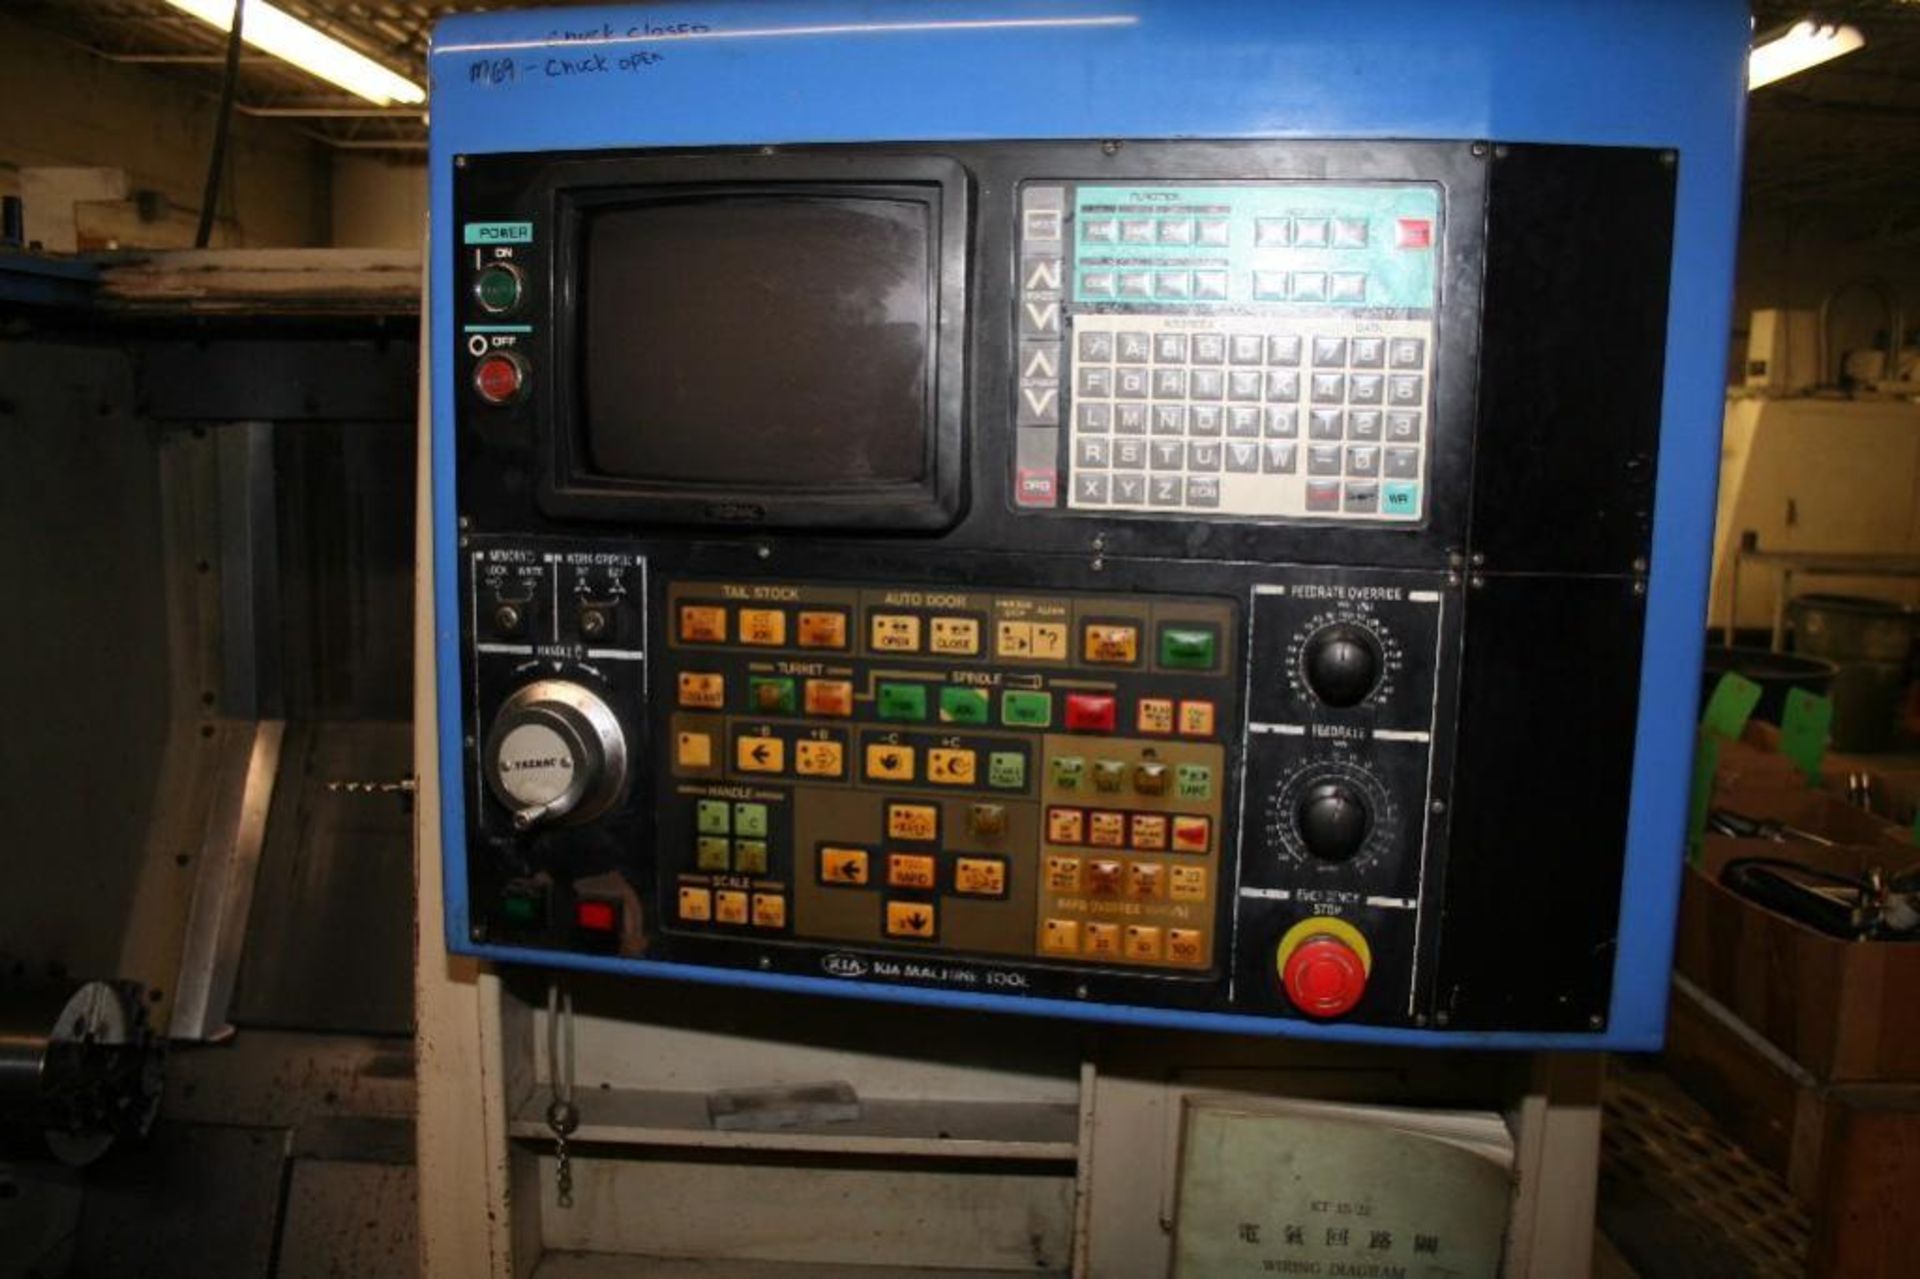 KIA KT15 CNC Lathe, 6" 3-Jaw Chuck, 12 Position Turret, Tail Stock, Ser KT15170, 1994 - Image 2 of 5